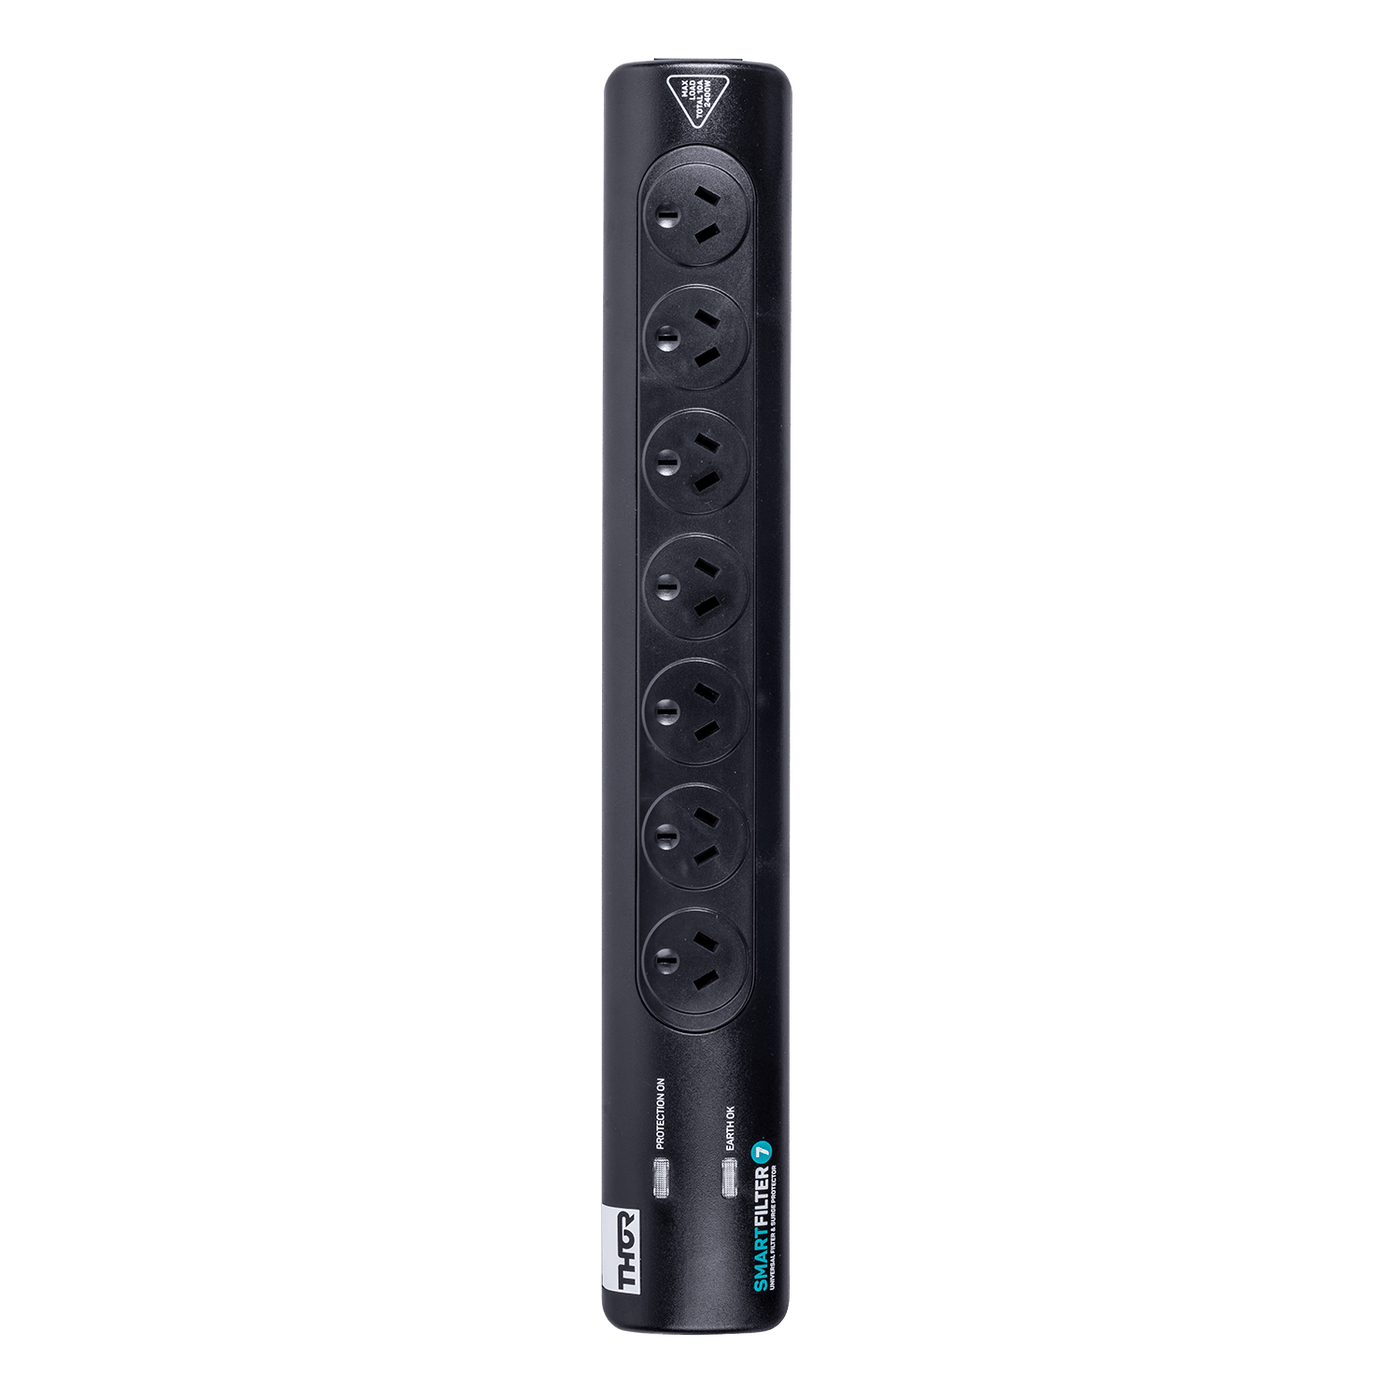 Thor Thor D/145 7 Way Surge Protector with Better Filtration Power